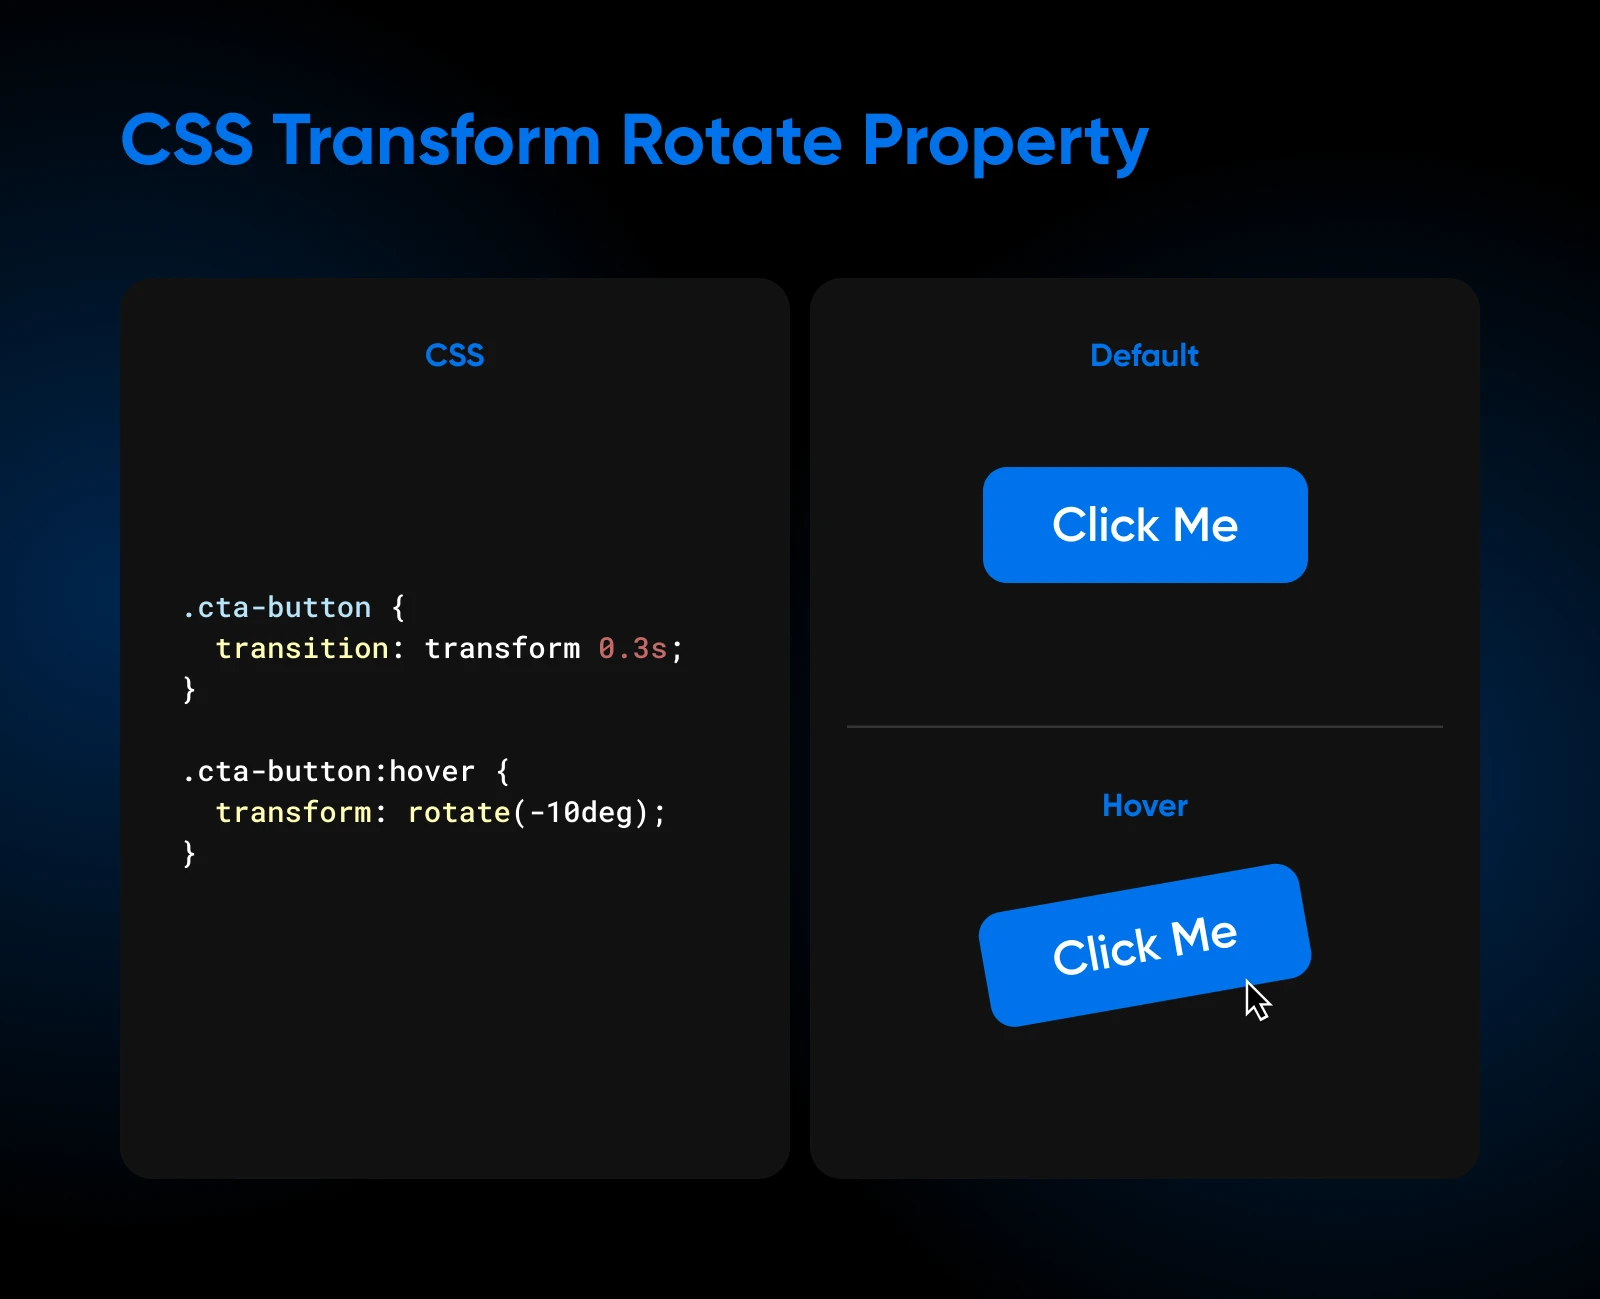 CSS code for rotating the property on the left, and the default vs. hover designs for the "Click Me" button on the right. 